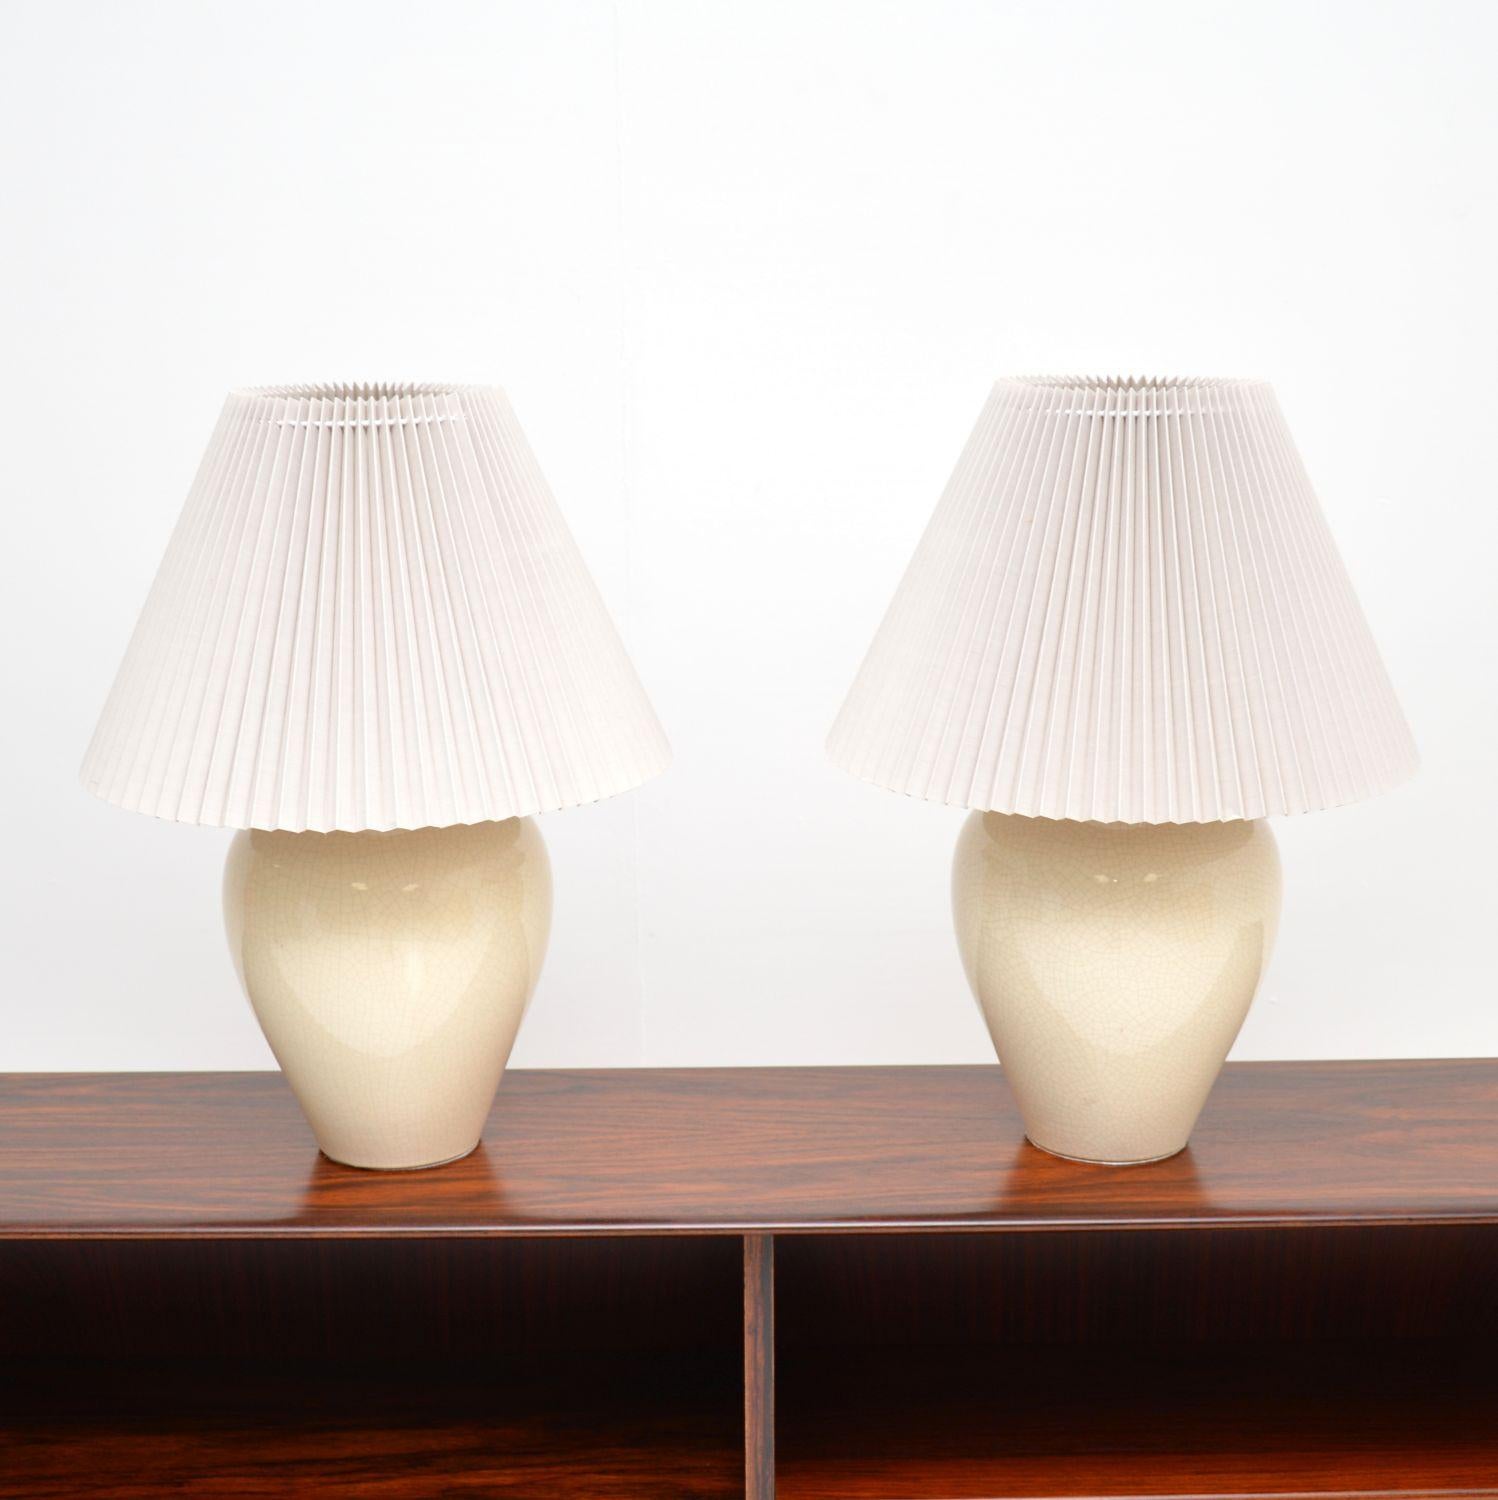 A stunning pair of vintage porcelain table lamps. They were made in England, and date from around the 1970-80’s.

The quality is fantastic, they have a wonderful shape and the cream porcelain has a wonderful crazed effect.

The condition is